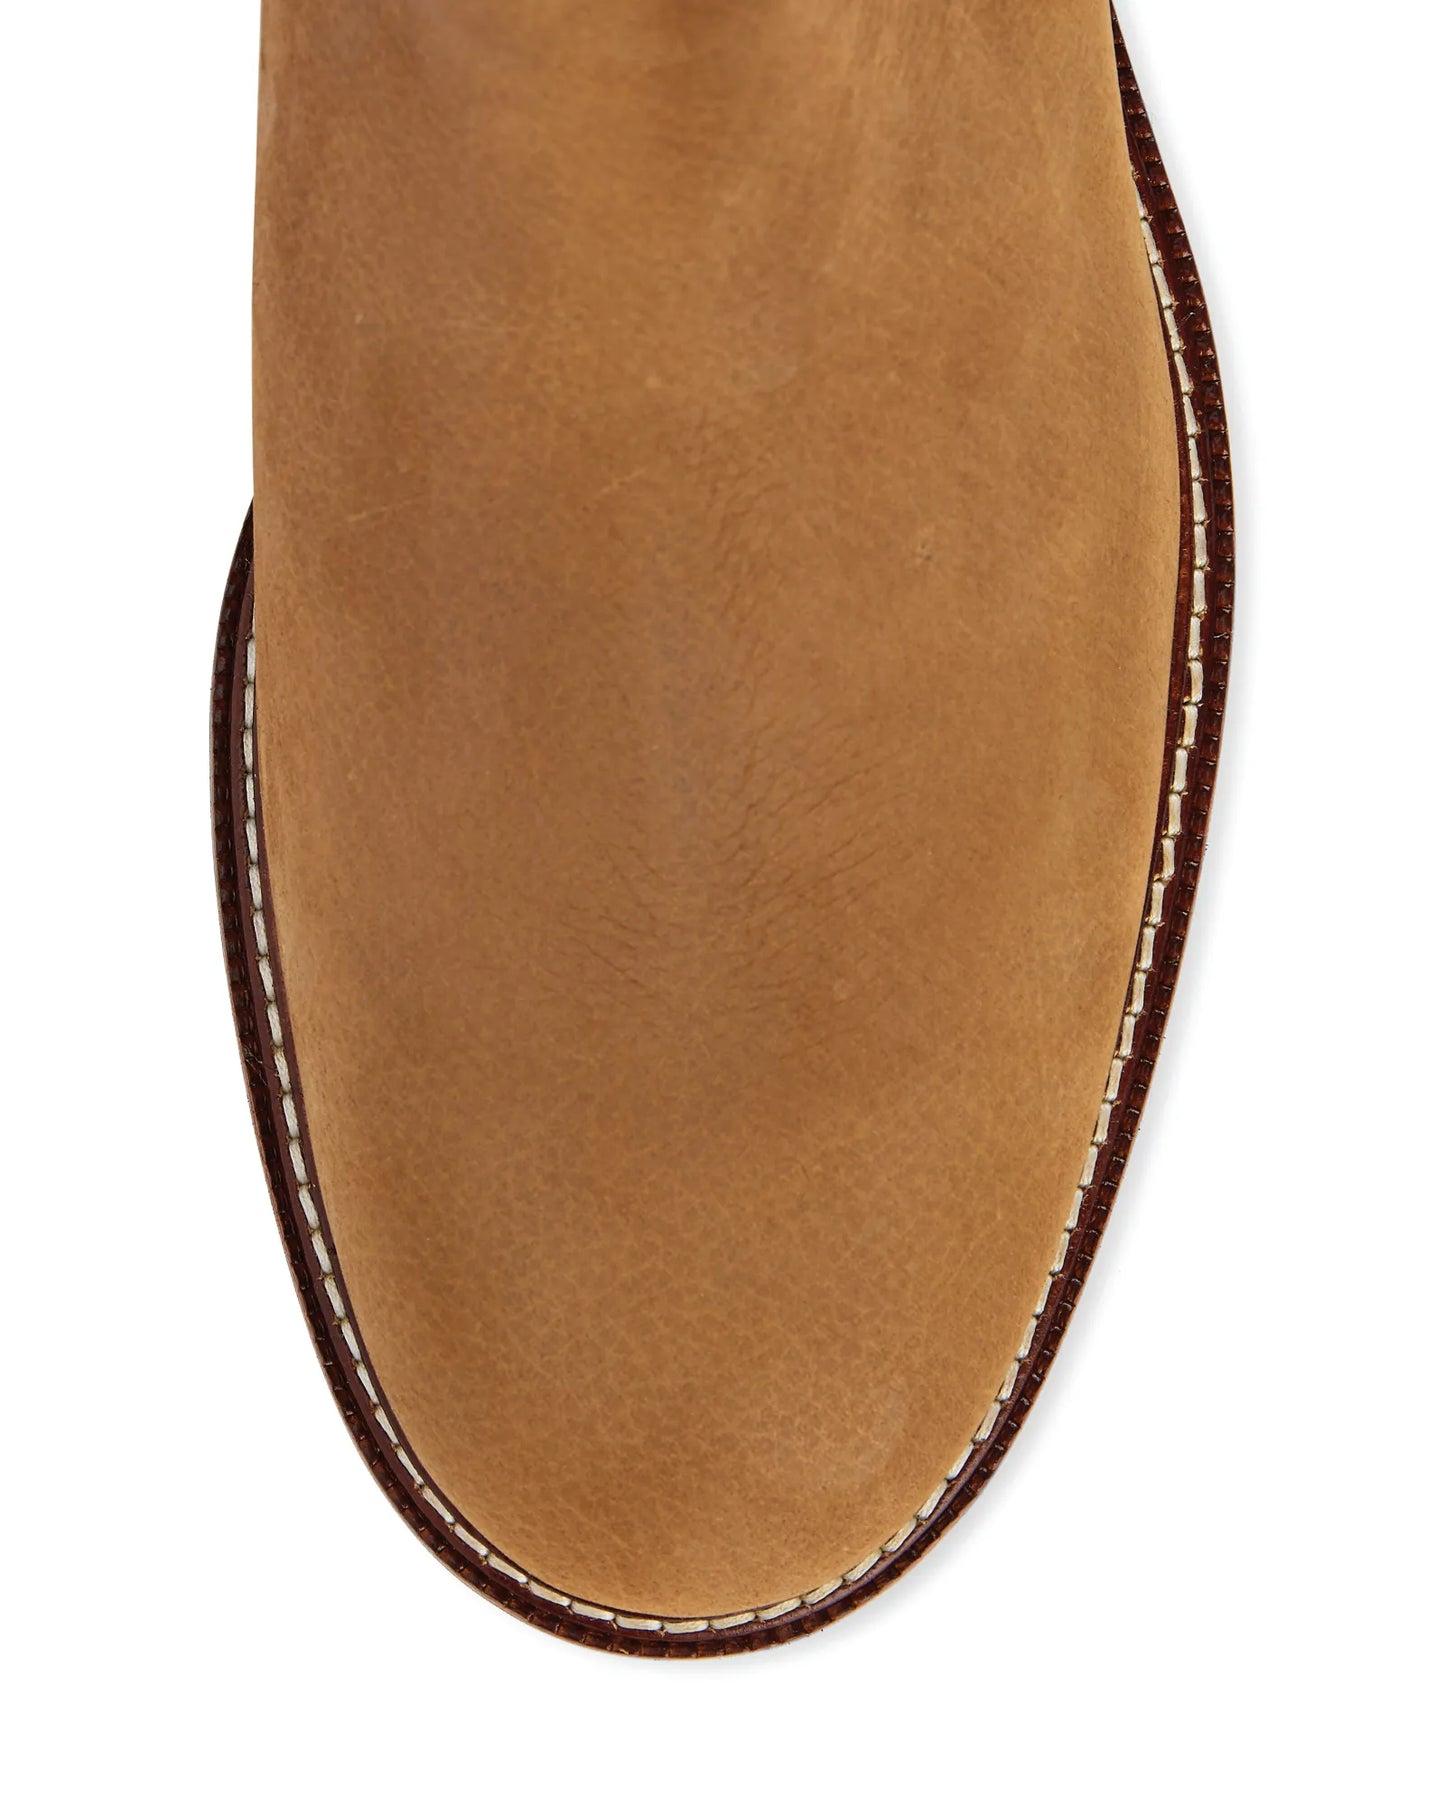 Offaly Boot - Brown